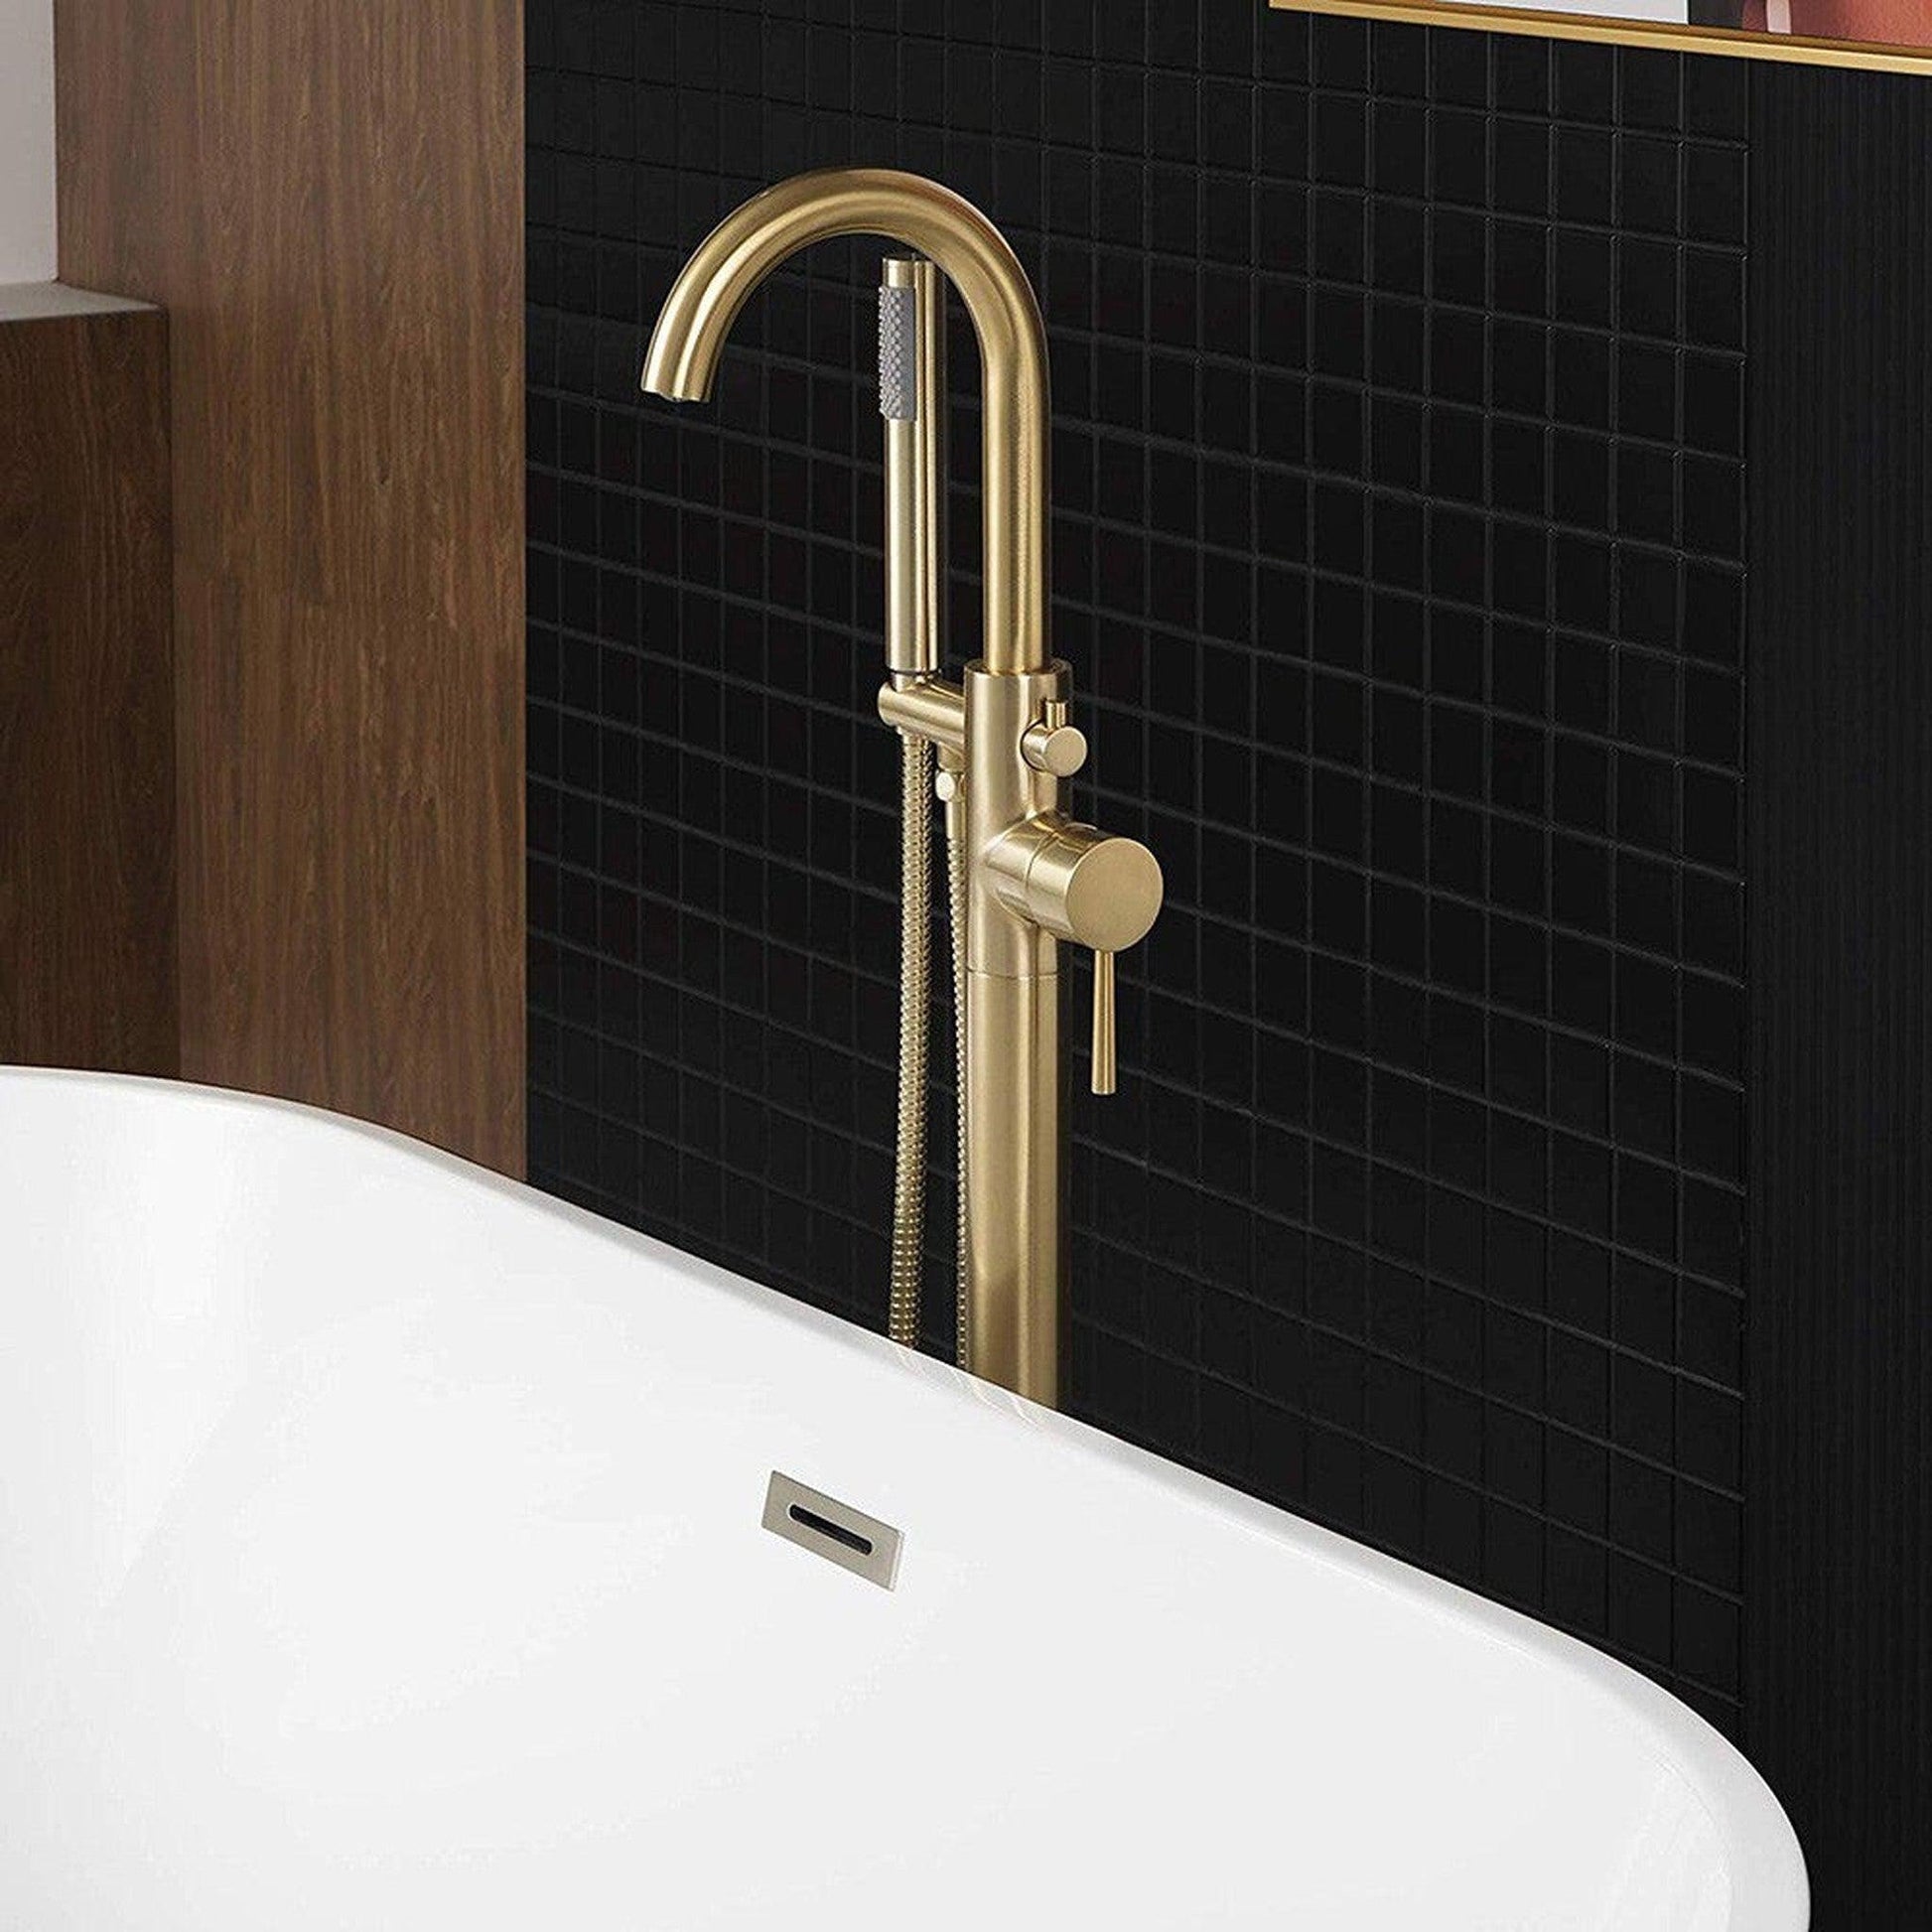 WoodBridge F0007BGRD Brushed Gold Contemporary Single Handle Floor Mount Freestanding Tub Filler Faucet With Hand Shower